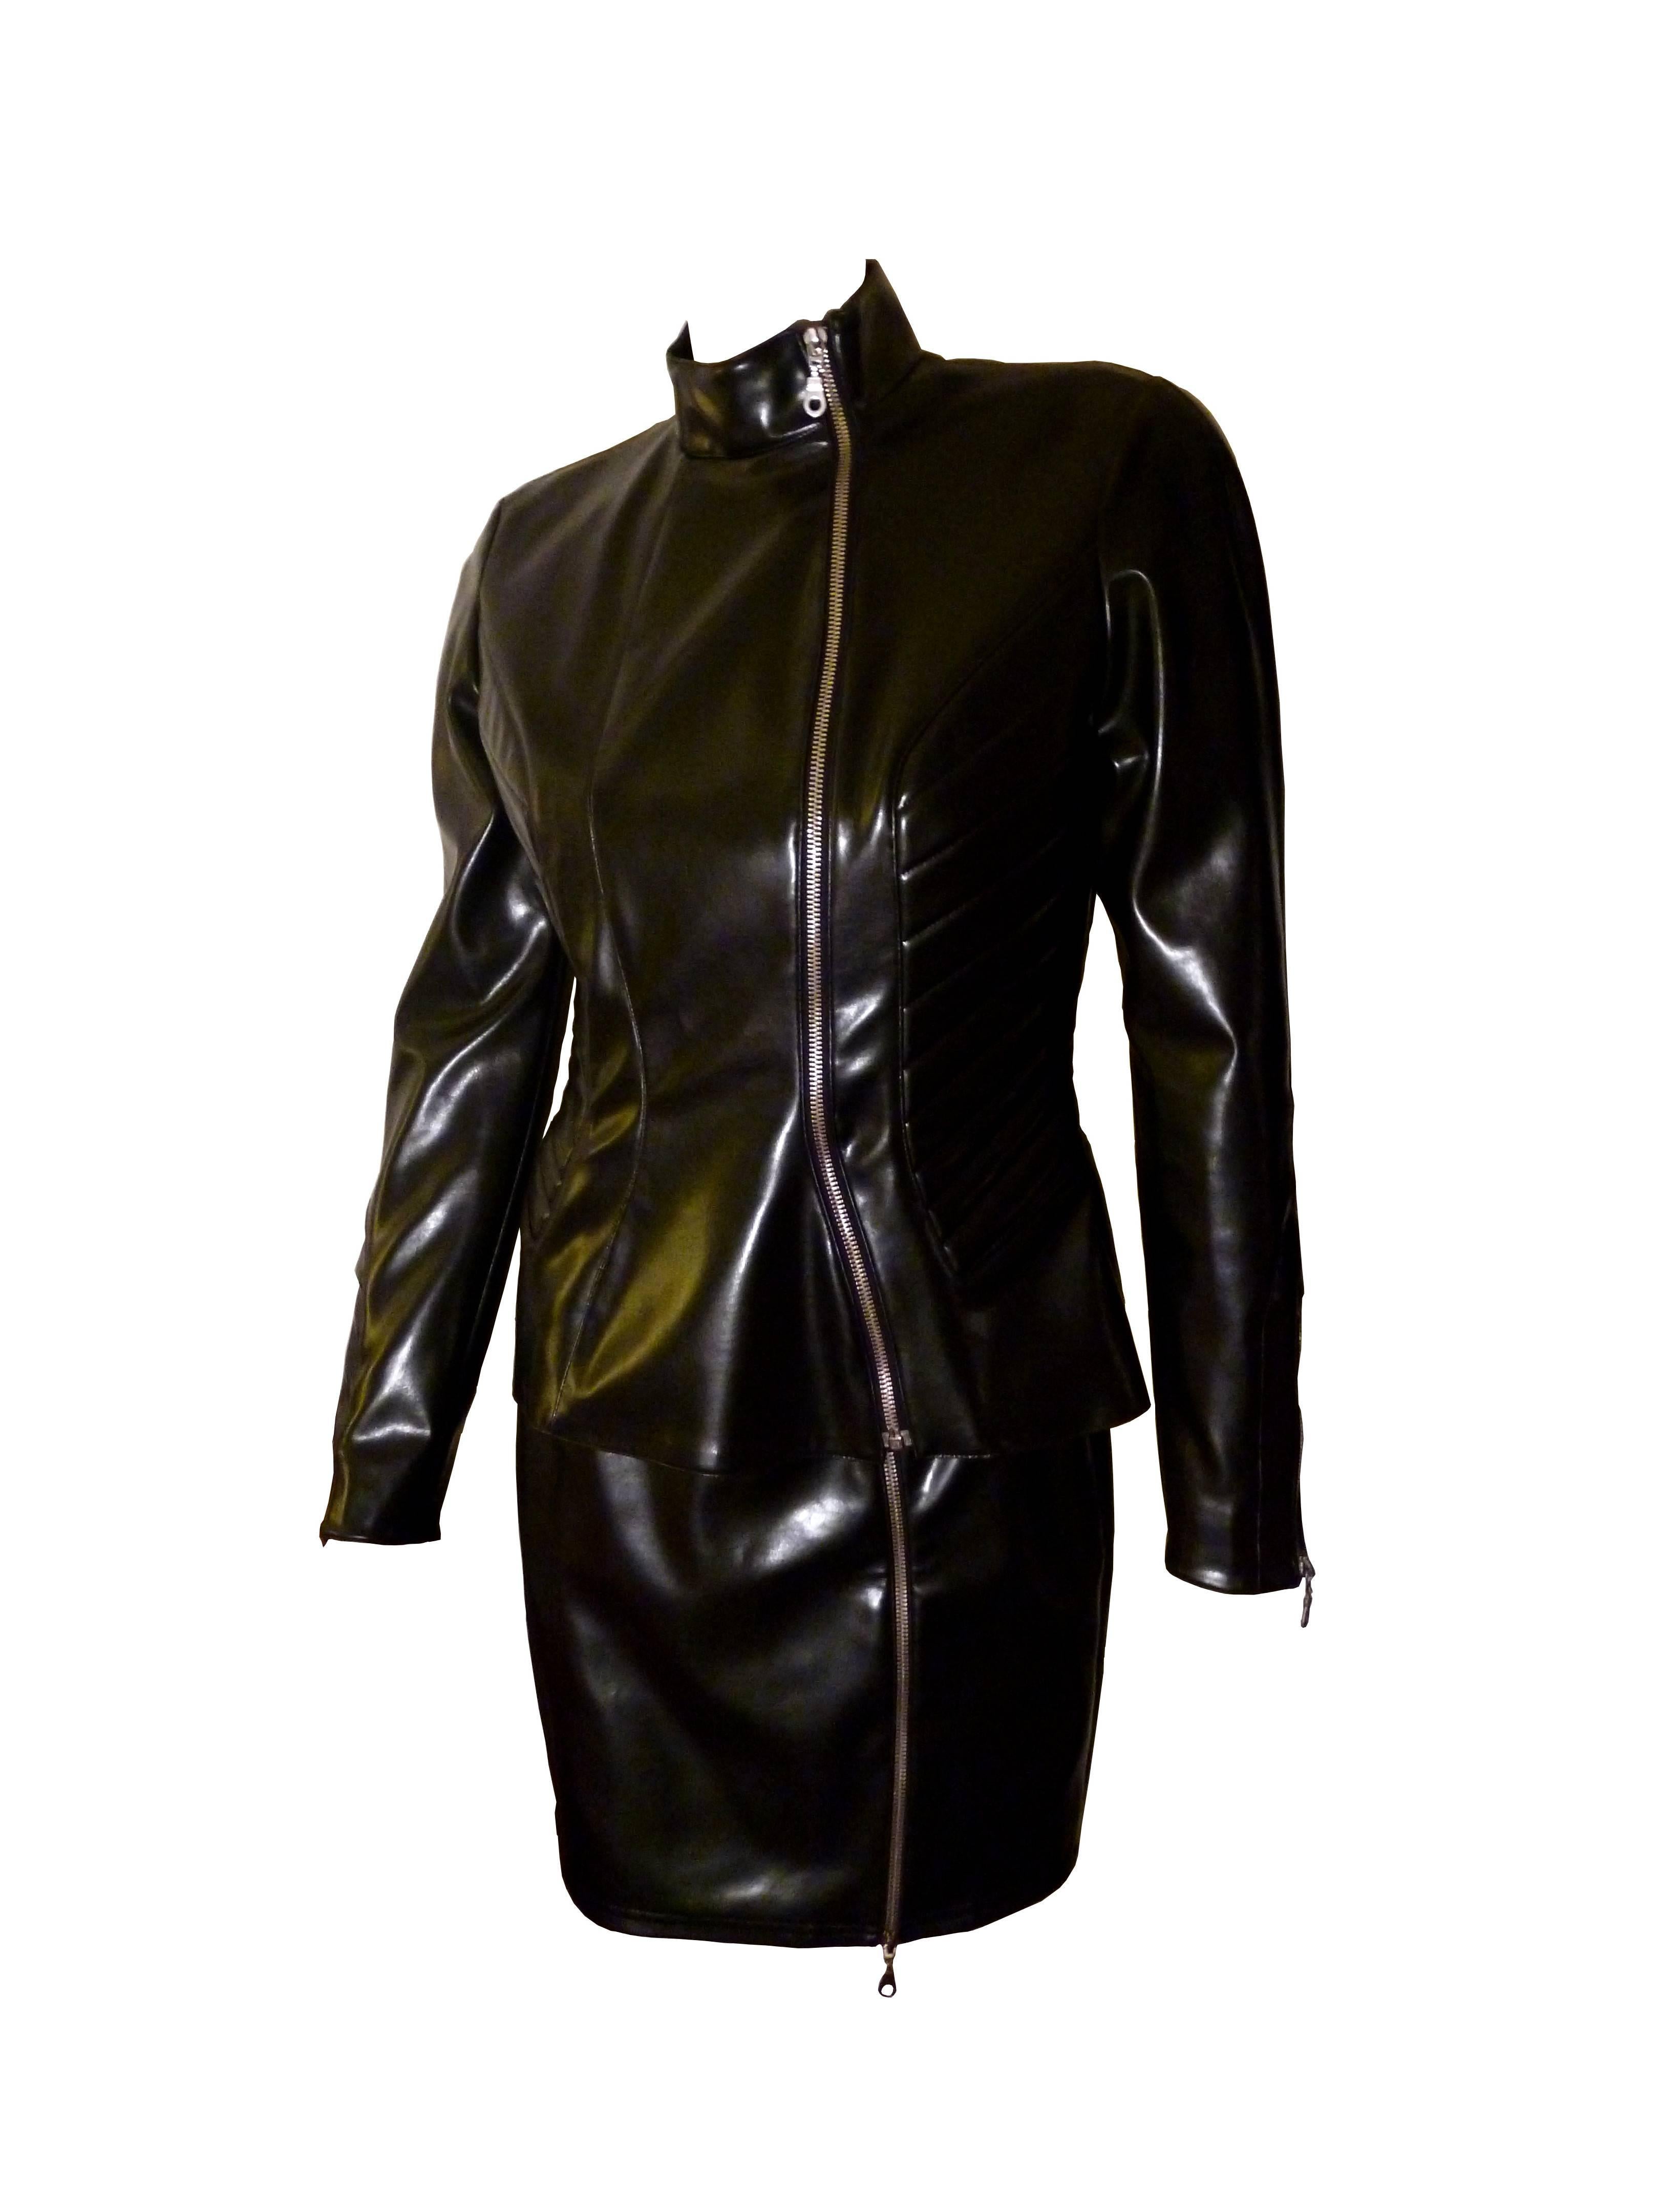 THIERRY MUGLER vintage black stretch rubber jacket and skirt.

Great sculpted jacket and skirt, typical from Mugler's cut.

Fitted jacket with armor style matelasse details on the sides.

Long asymetrical zip at the front of the jacket and